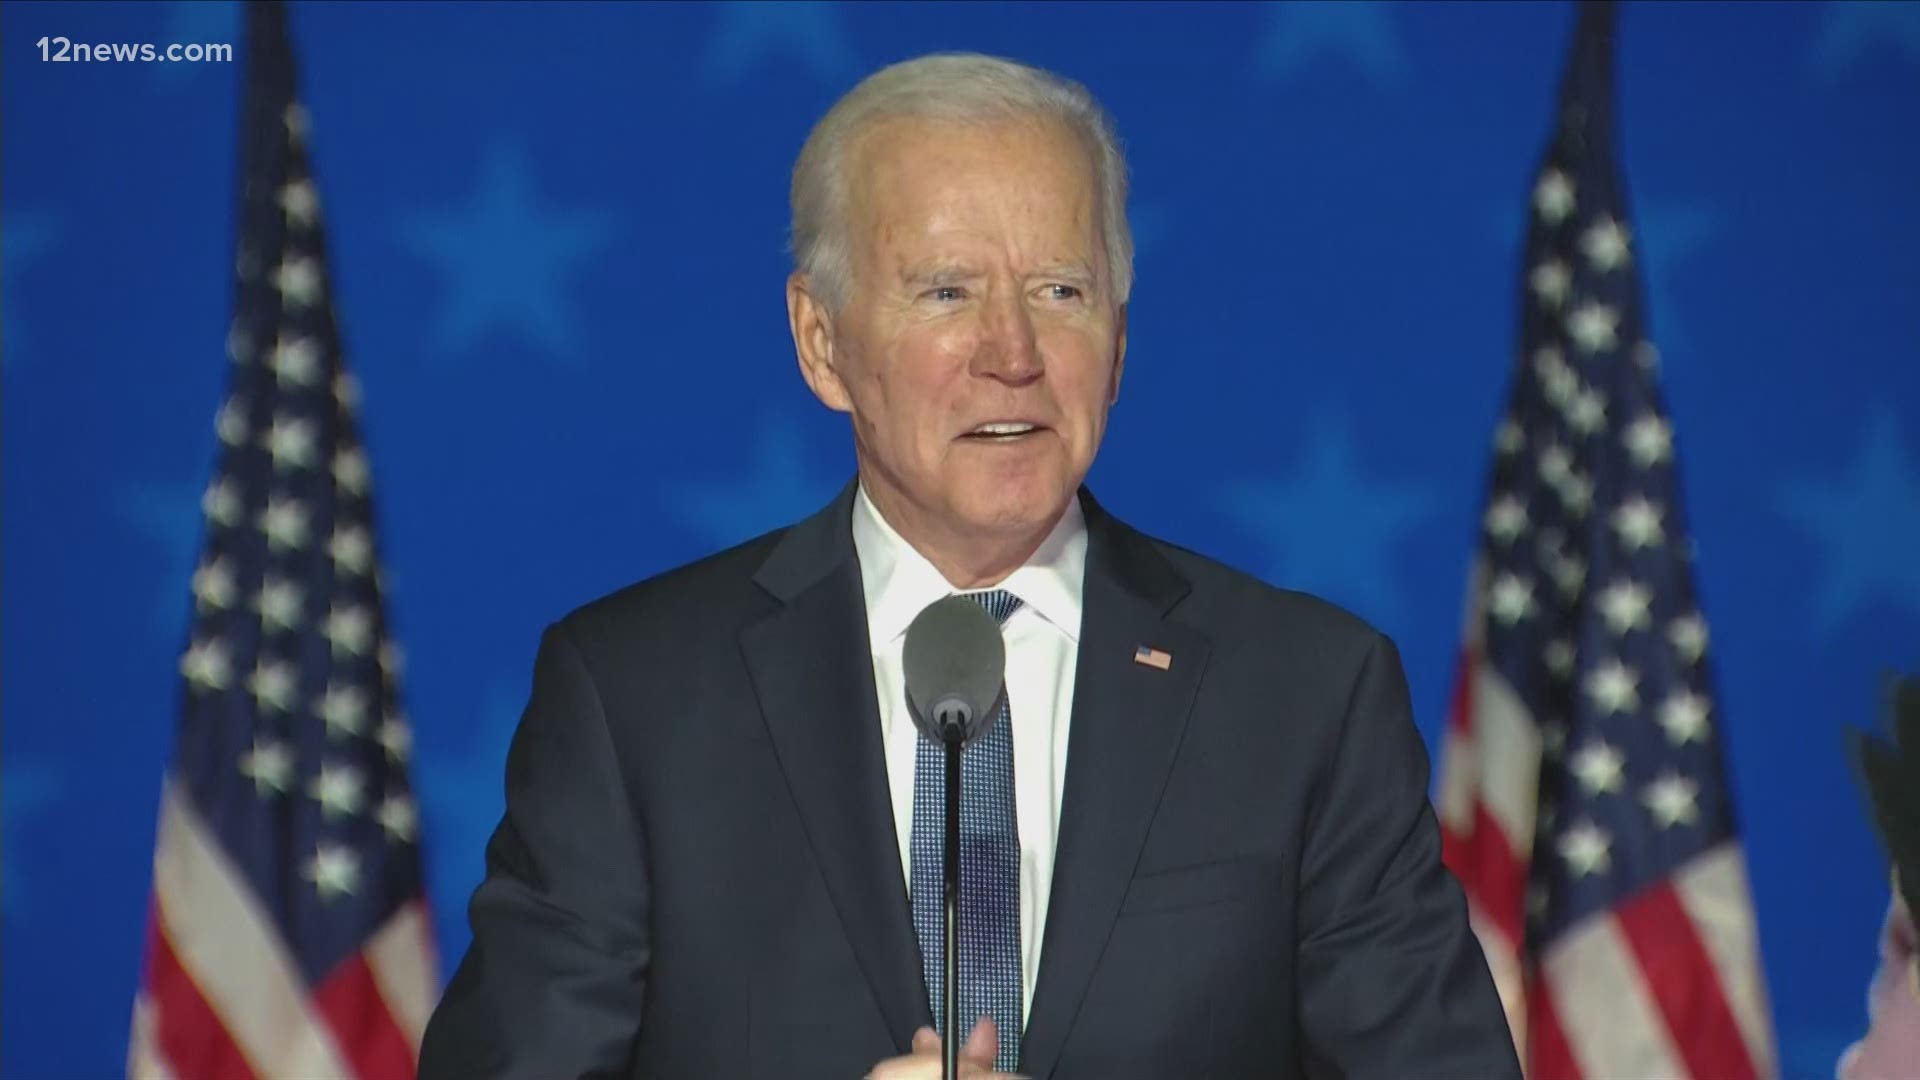 Joe Biden gave a speech addressing the nation as Election Night ballots were still being counted. Biden said he remained hopeful that he could still win.